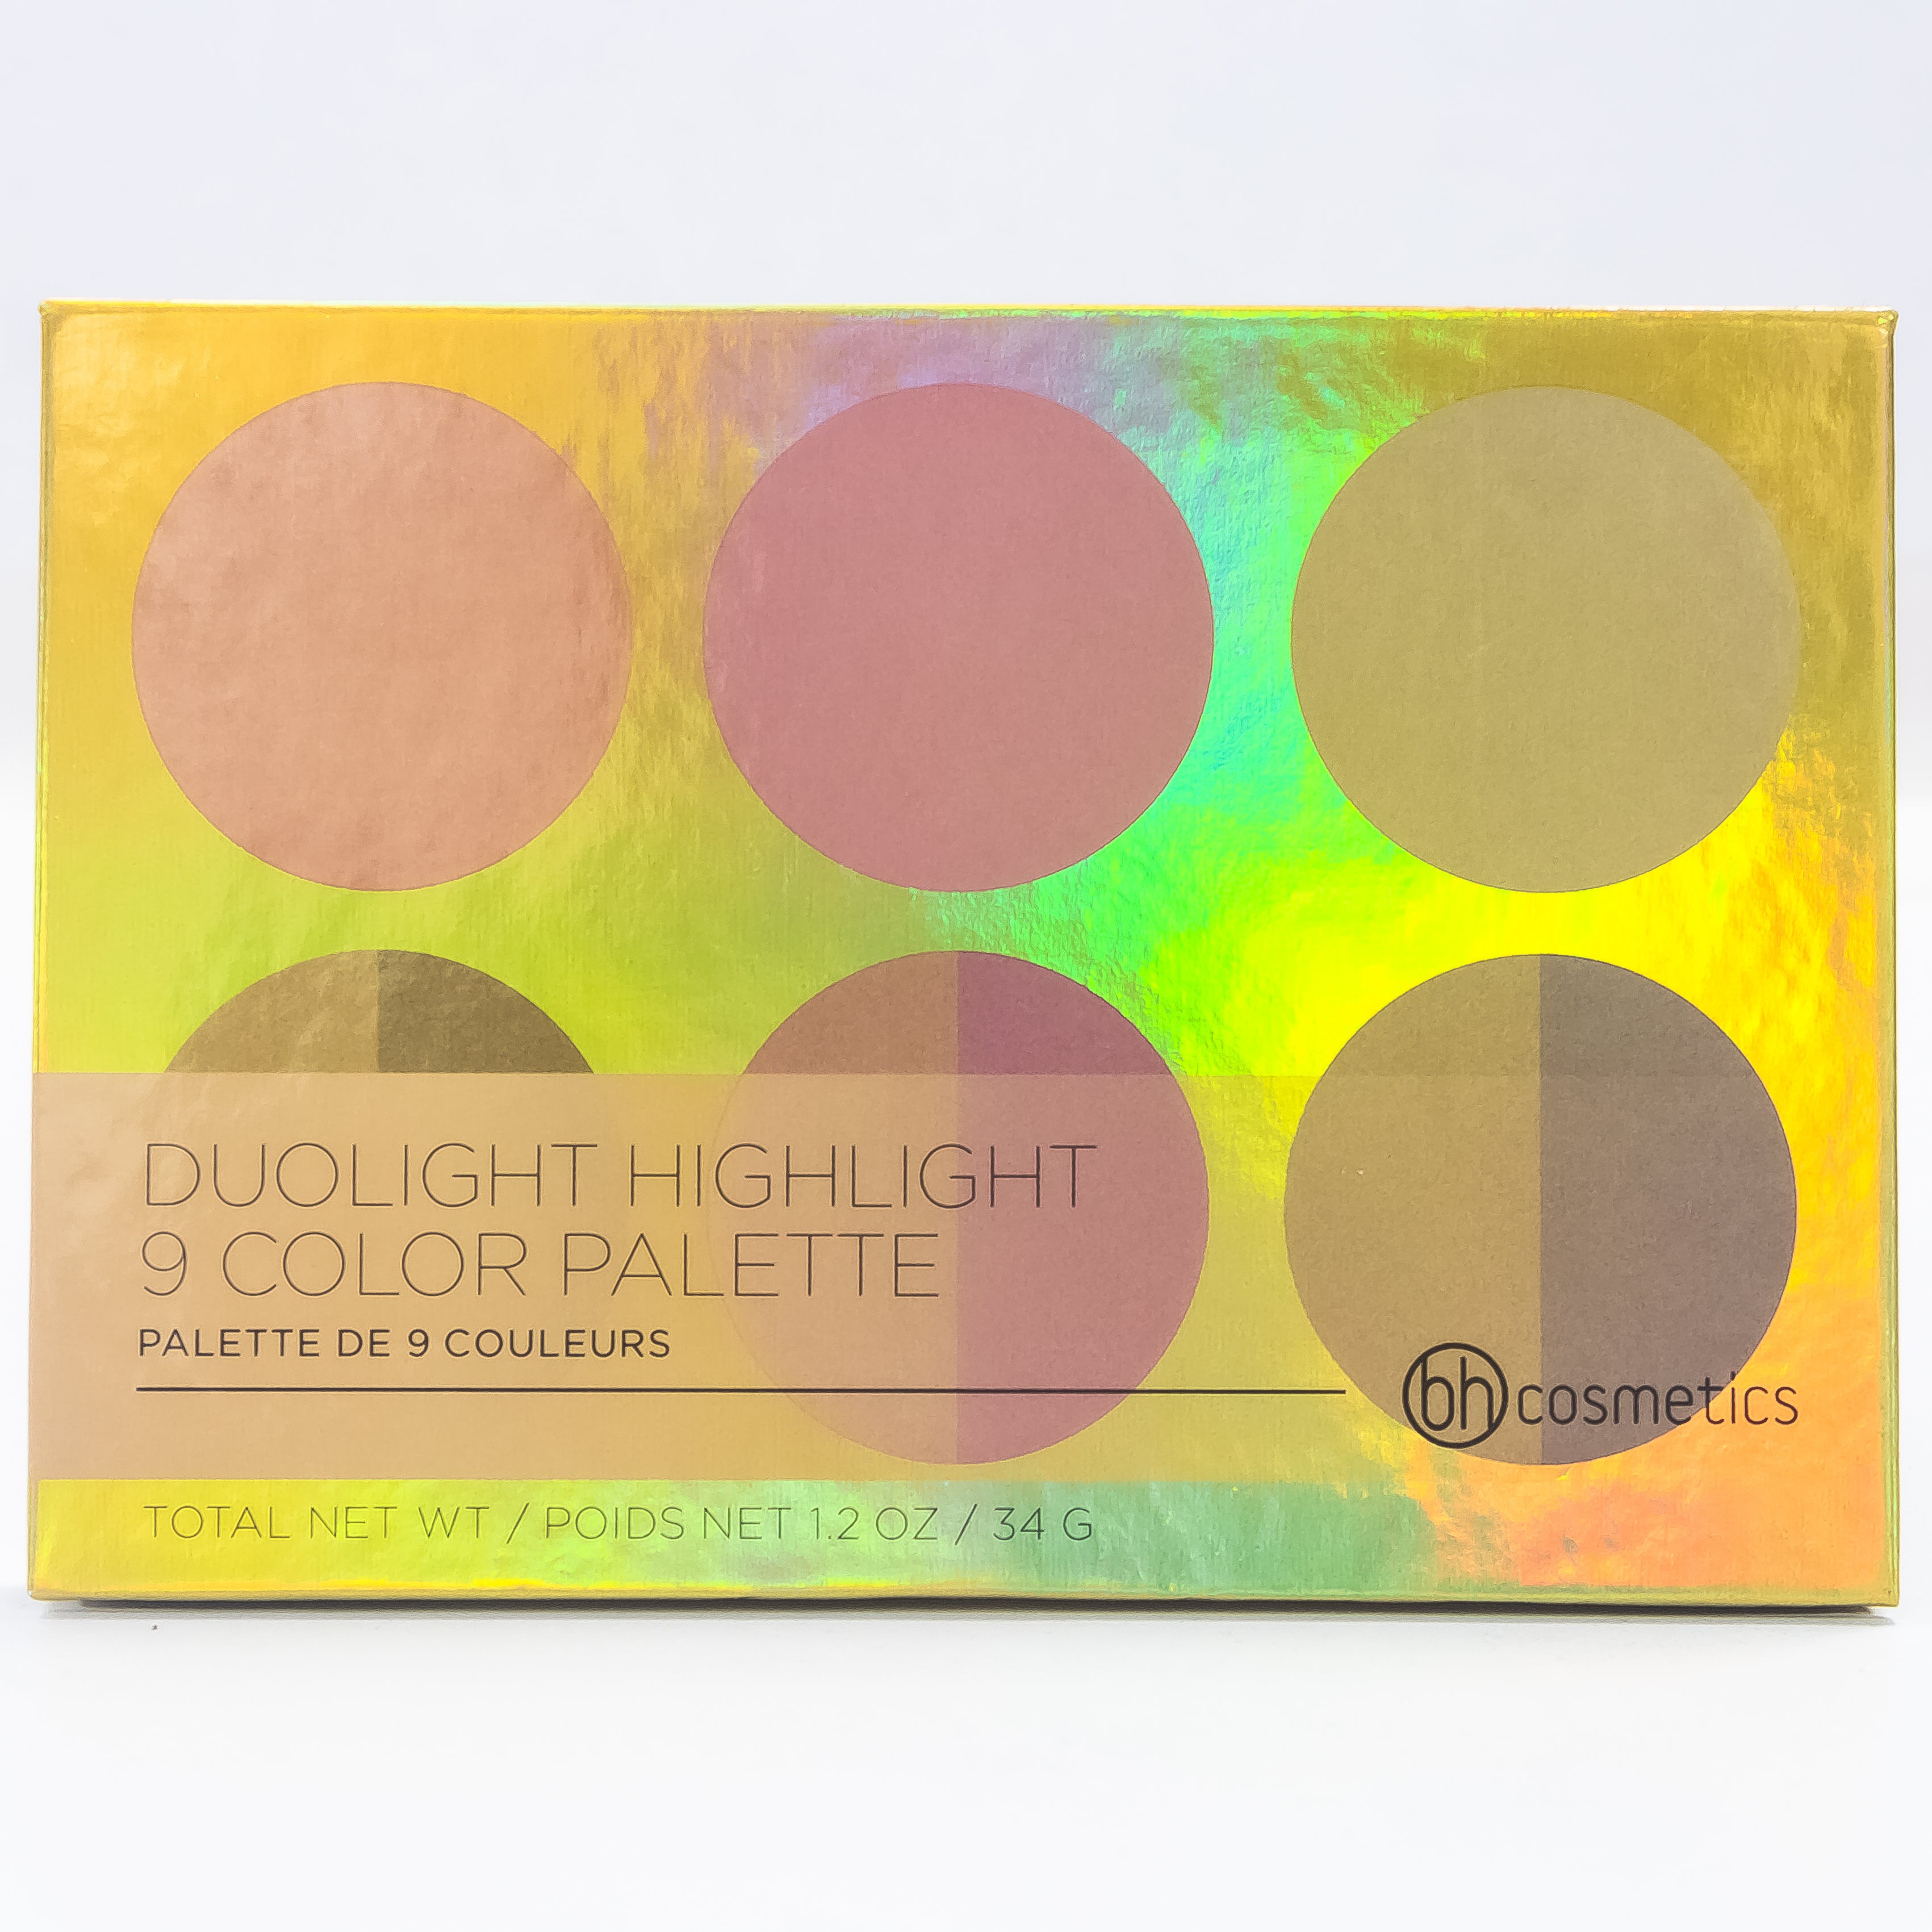 HIGHLIGHTER BH COSMETICS DOULIGHT HIGHLIGHT 9 COLOR